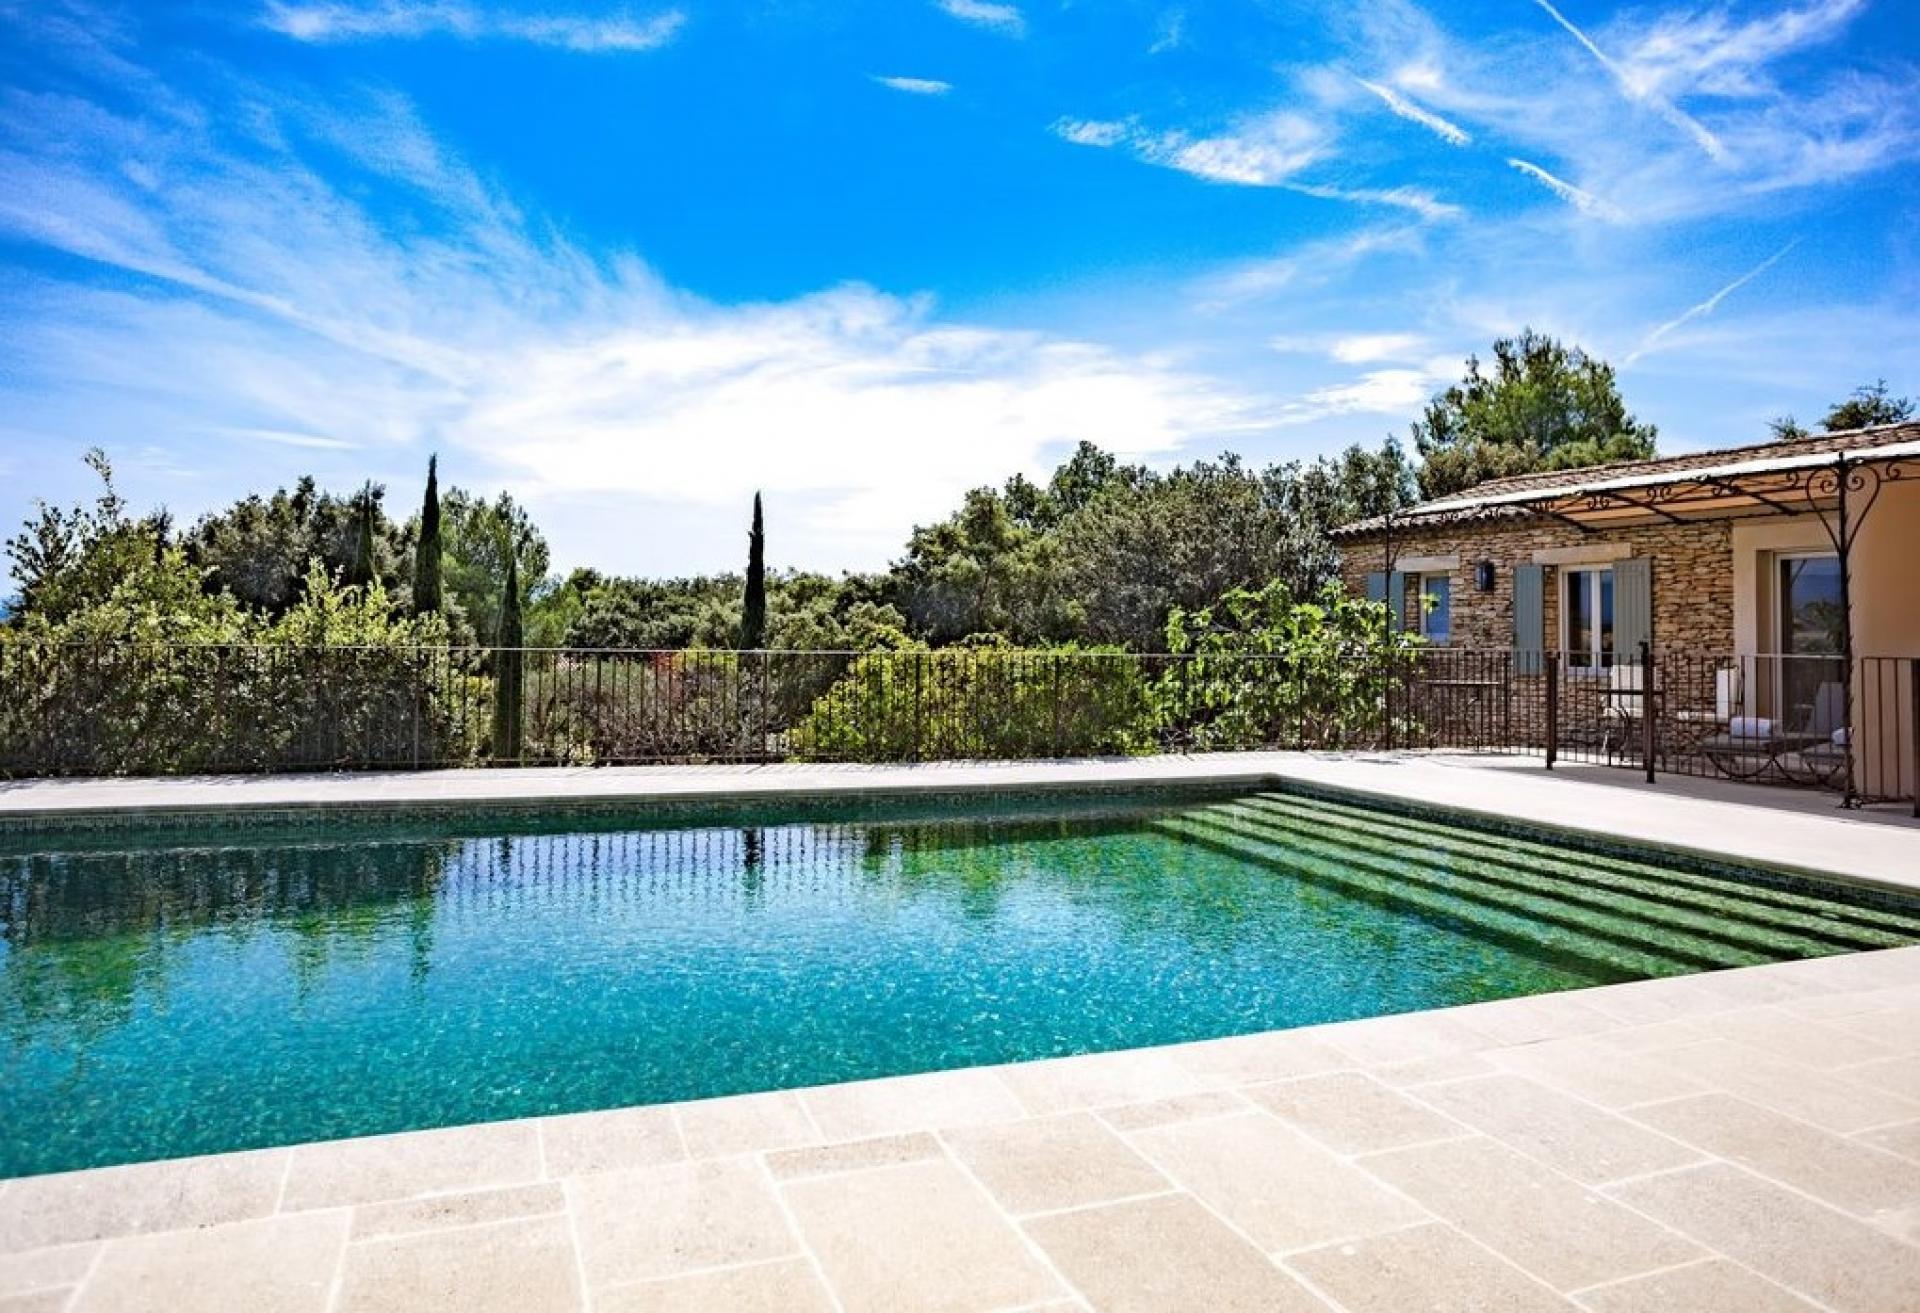 LA VILLA ANGELE HOLIDAY RENTAL IN LUBERON PROVENCE AND ITS SWIMMING POOL